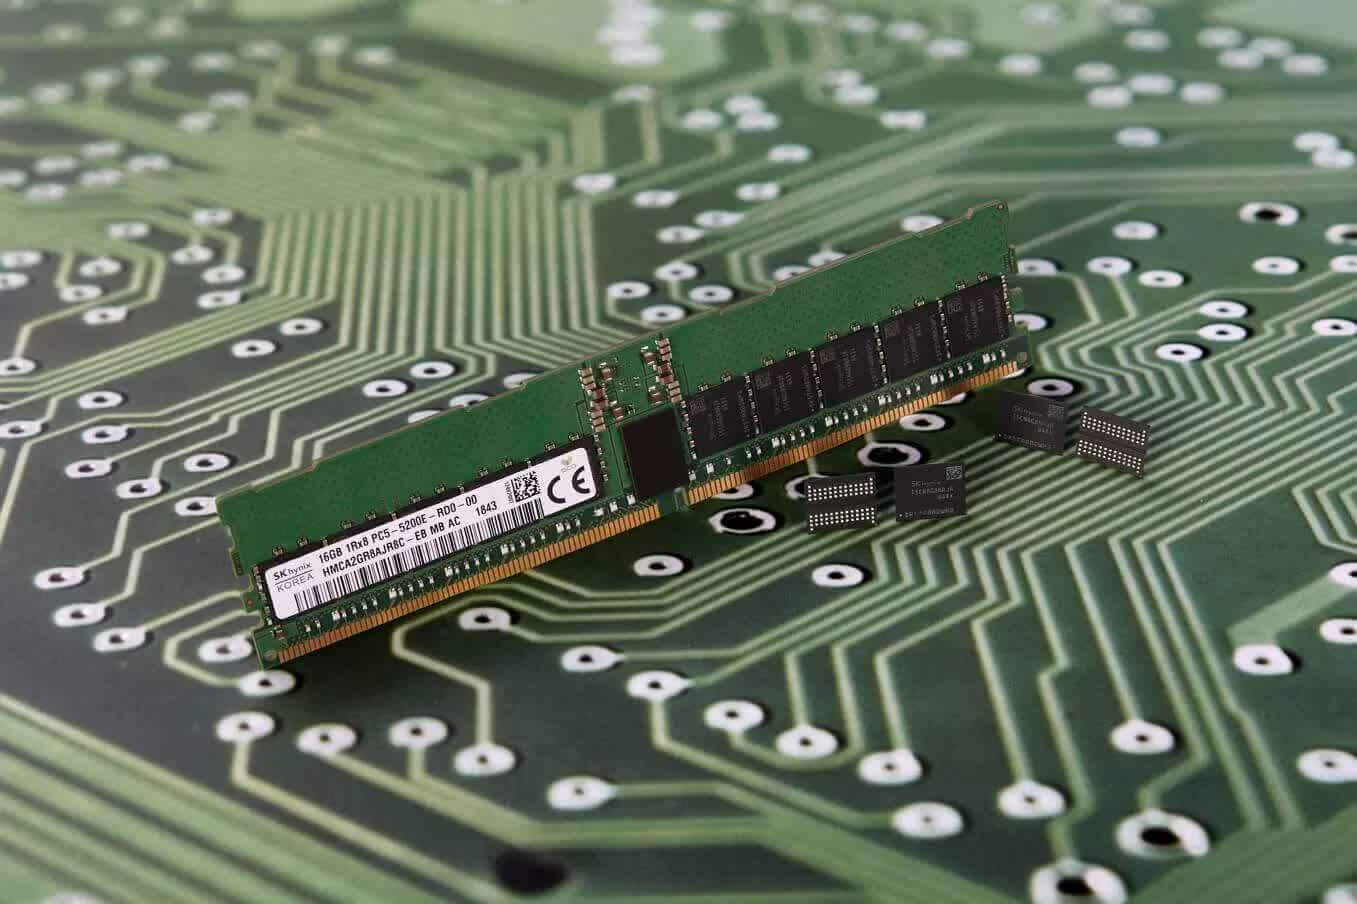 The global chip shortage is now impacting DDR5 manufacturing